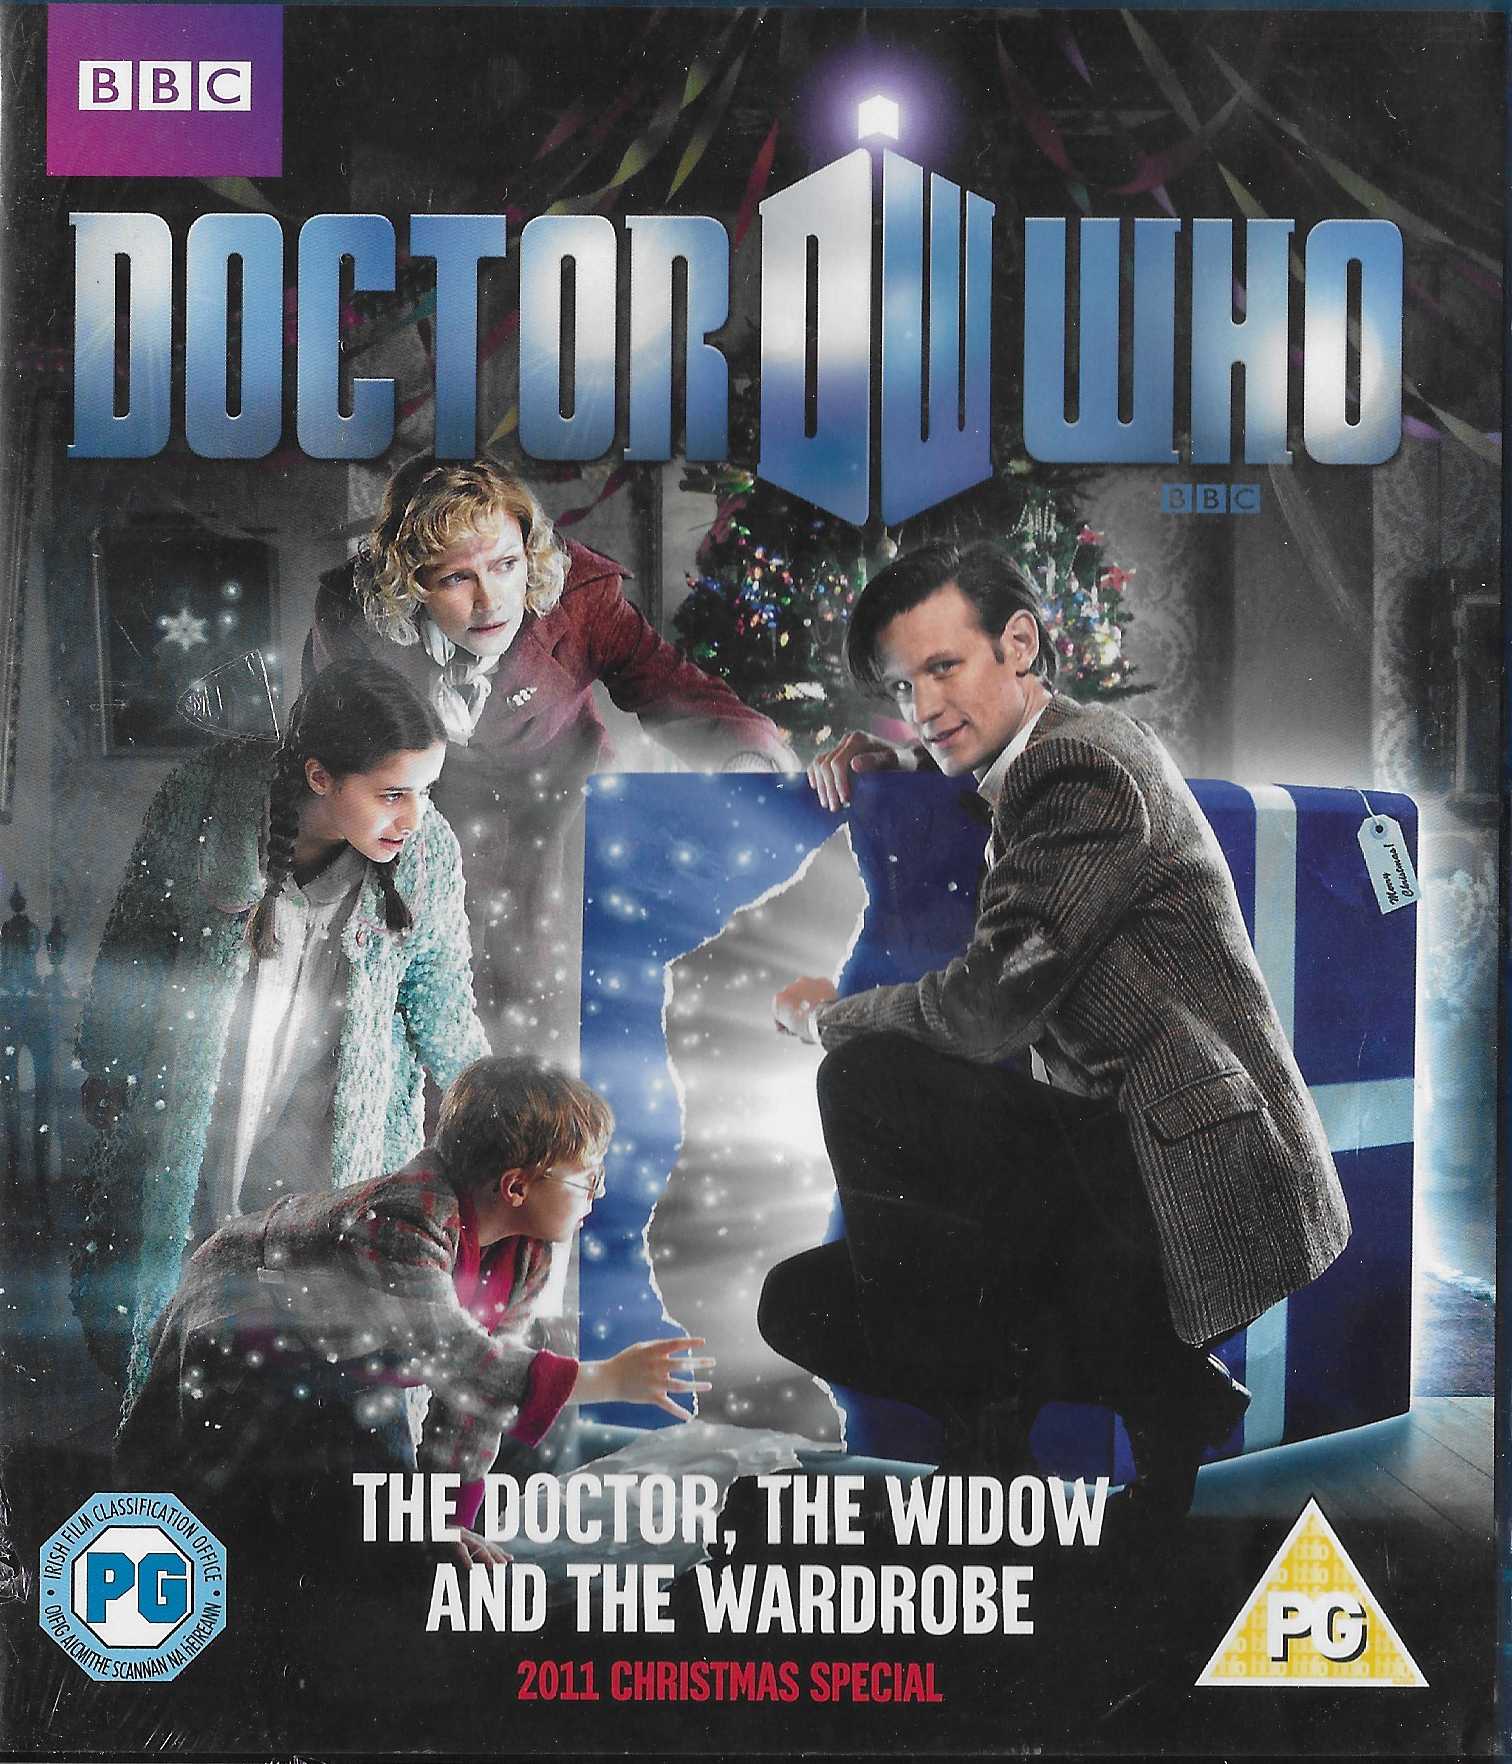 Picture of Doctor Who - The Doctor, the widow and the wardrobe by artist Steven Moffat from the BBC blu-rays - Records and Tapes library